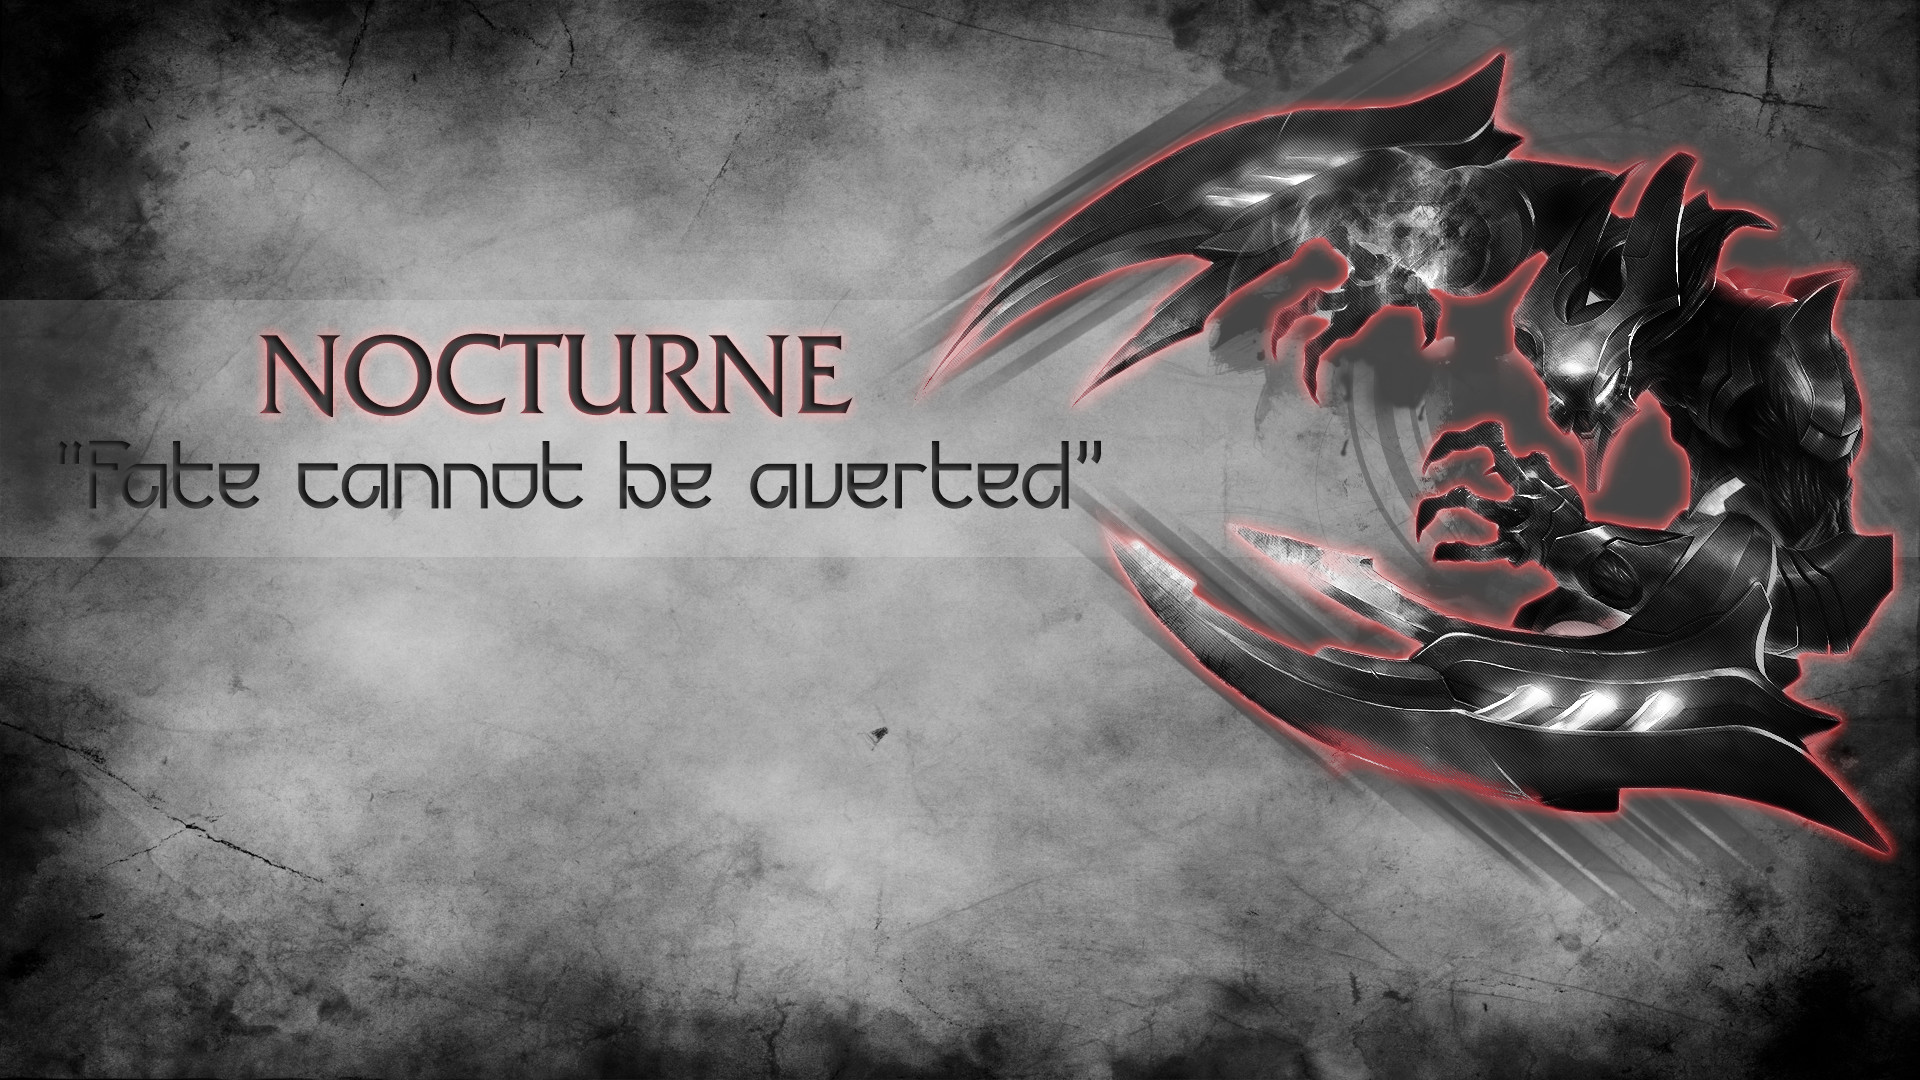 Photo Collection Nocturne Wallpaper By Seeminglymeaningless 1920x1080